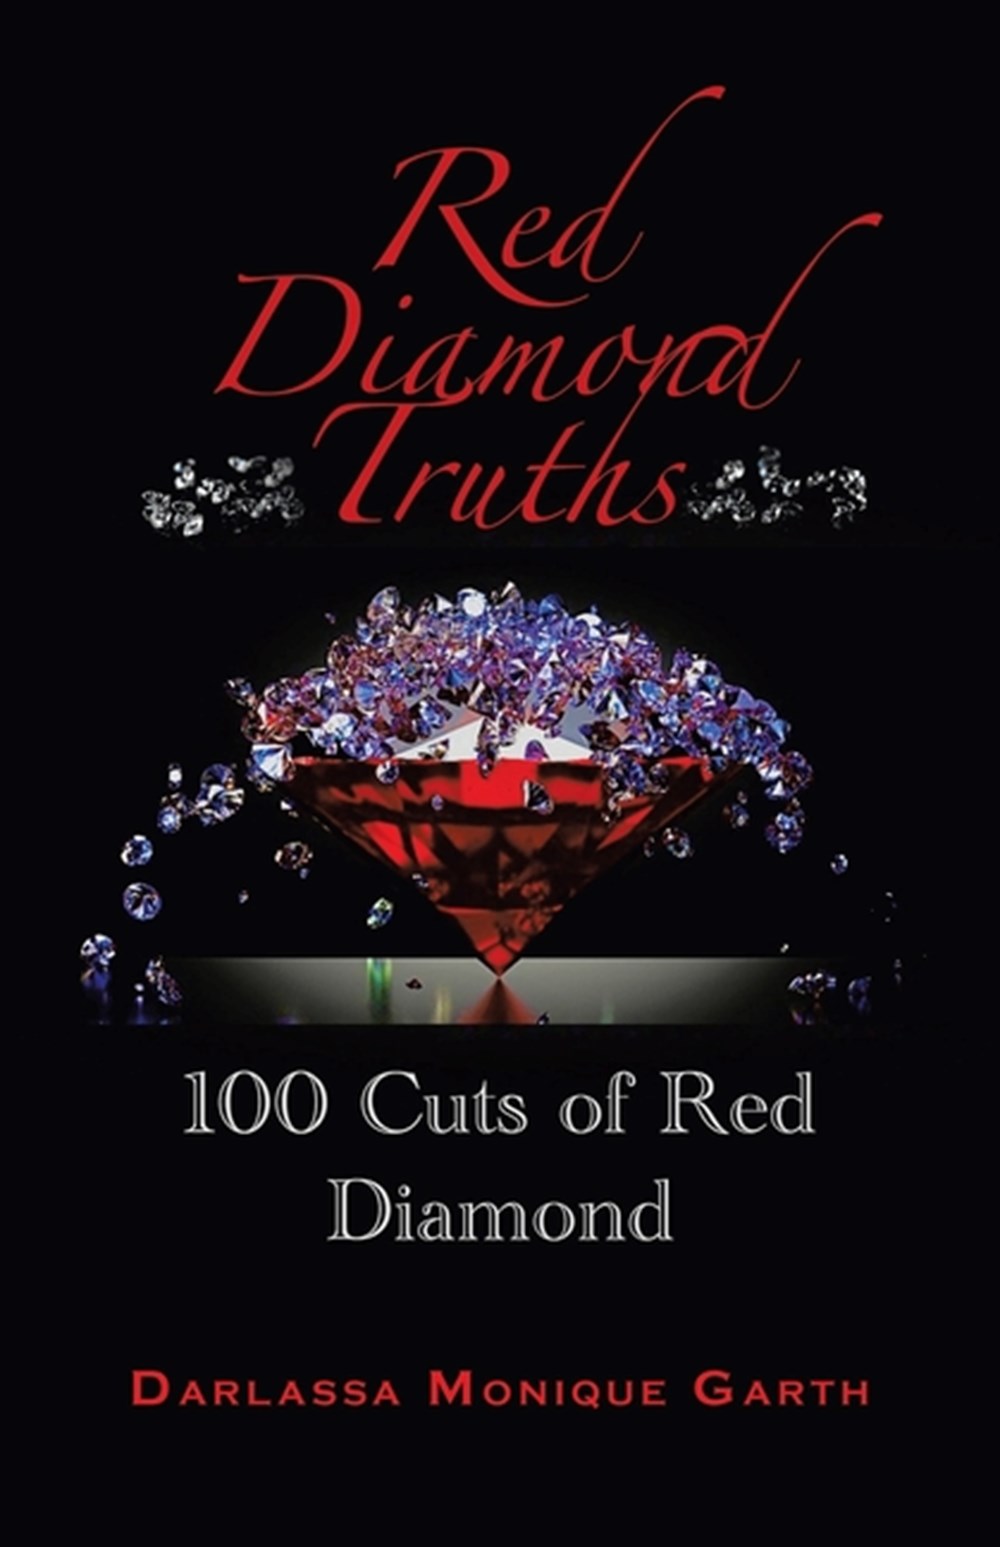 Red Diamond Truths: One Hundred Cuts of Red Diamond